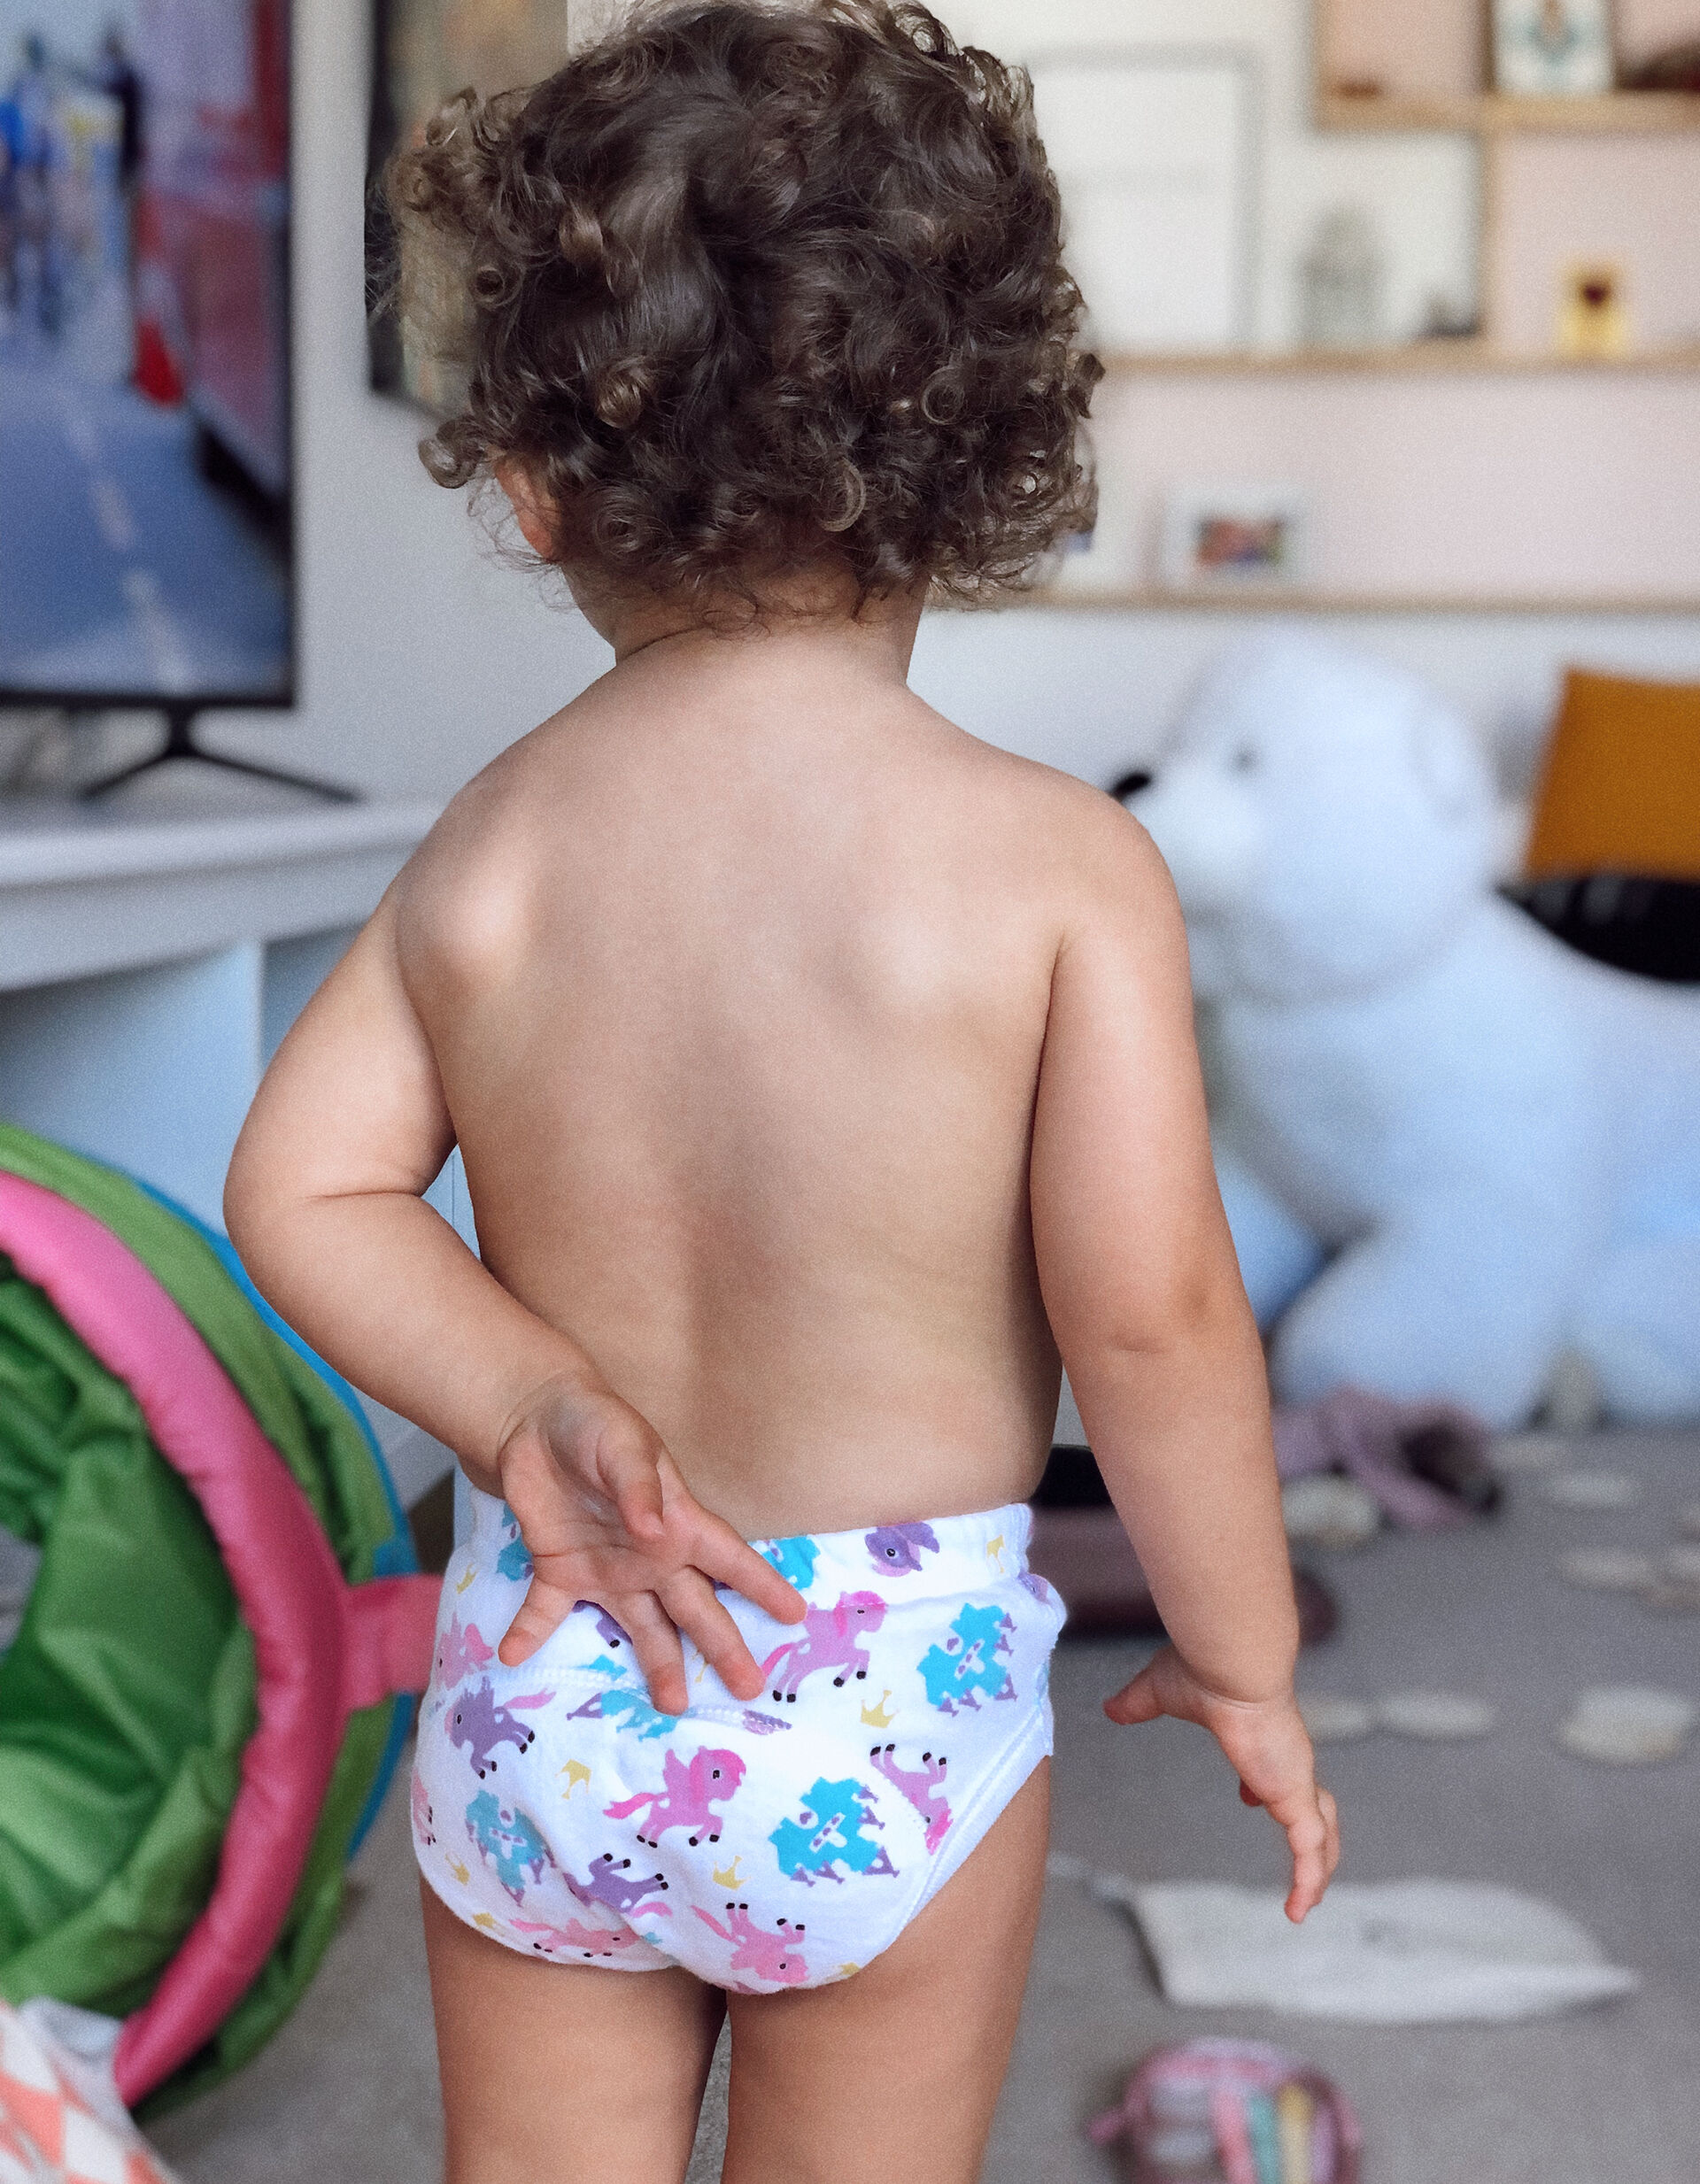 Should You Use Training Pants for Your Kids? Why and How? – Peejamas